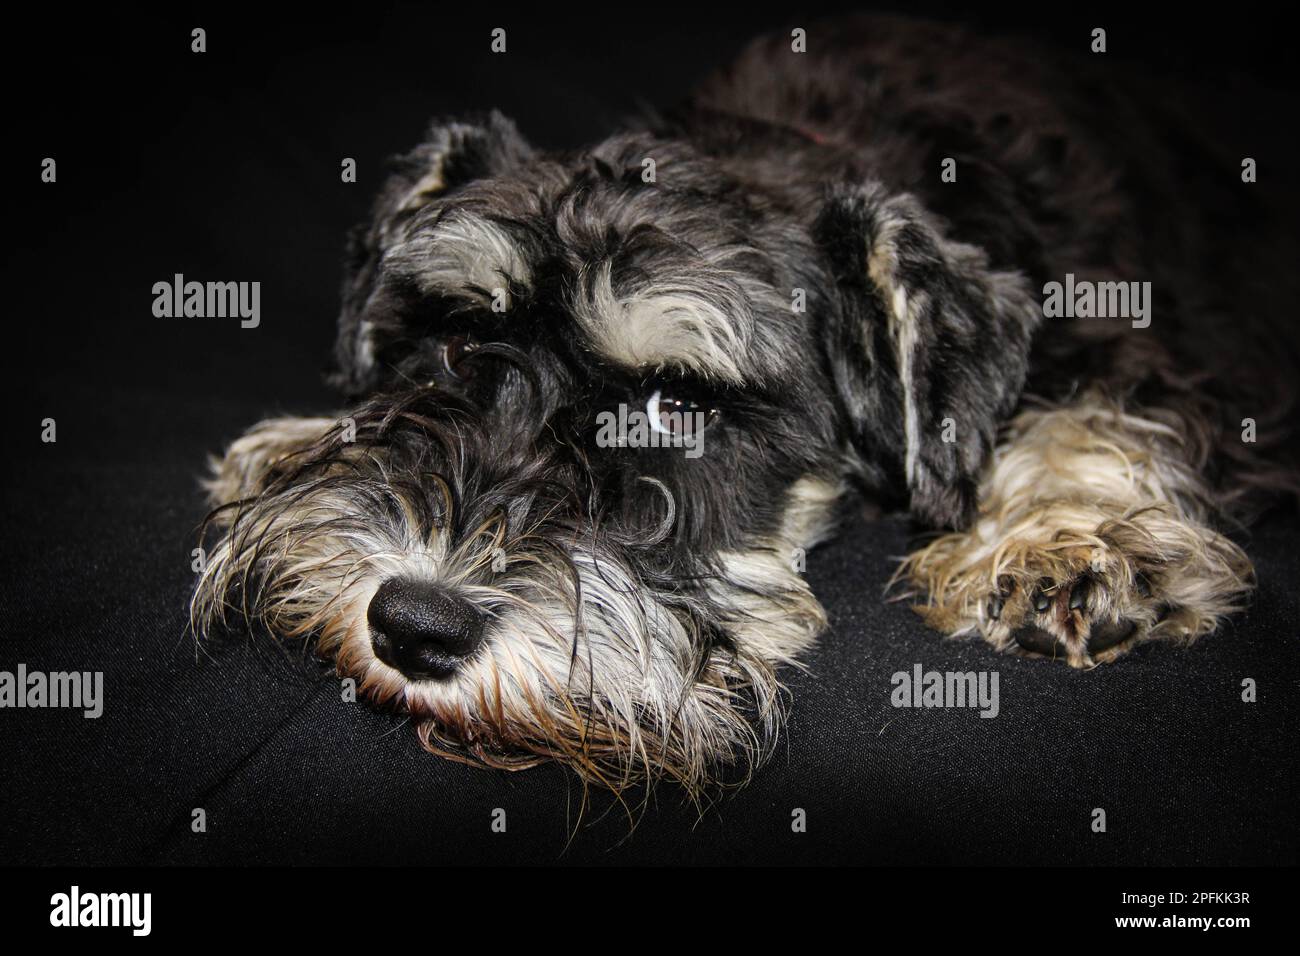 Head portrait of a black and silver adult miniature schnauzer dog lying down chin on floor dog against a bBlack background looking at camera Stock Photo